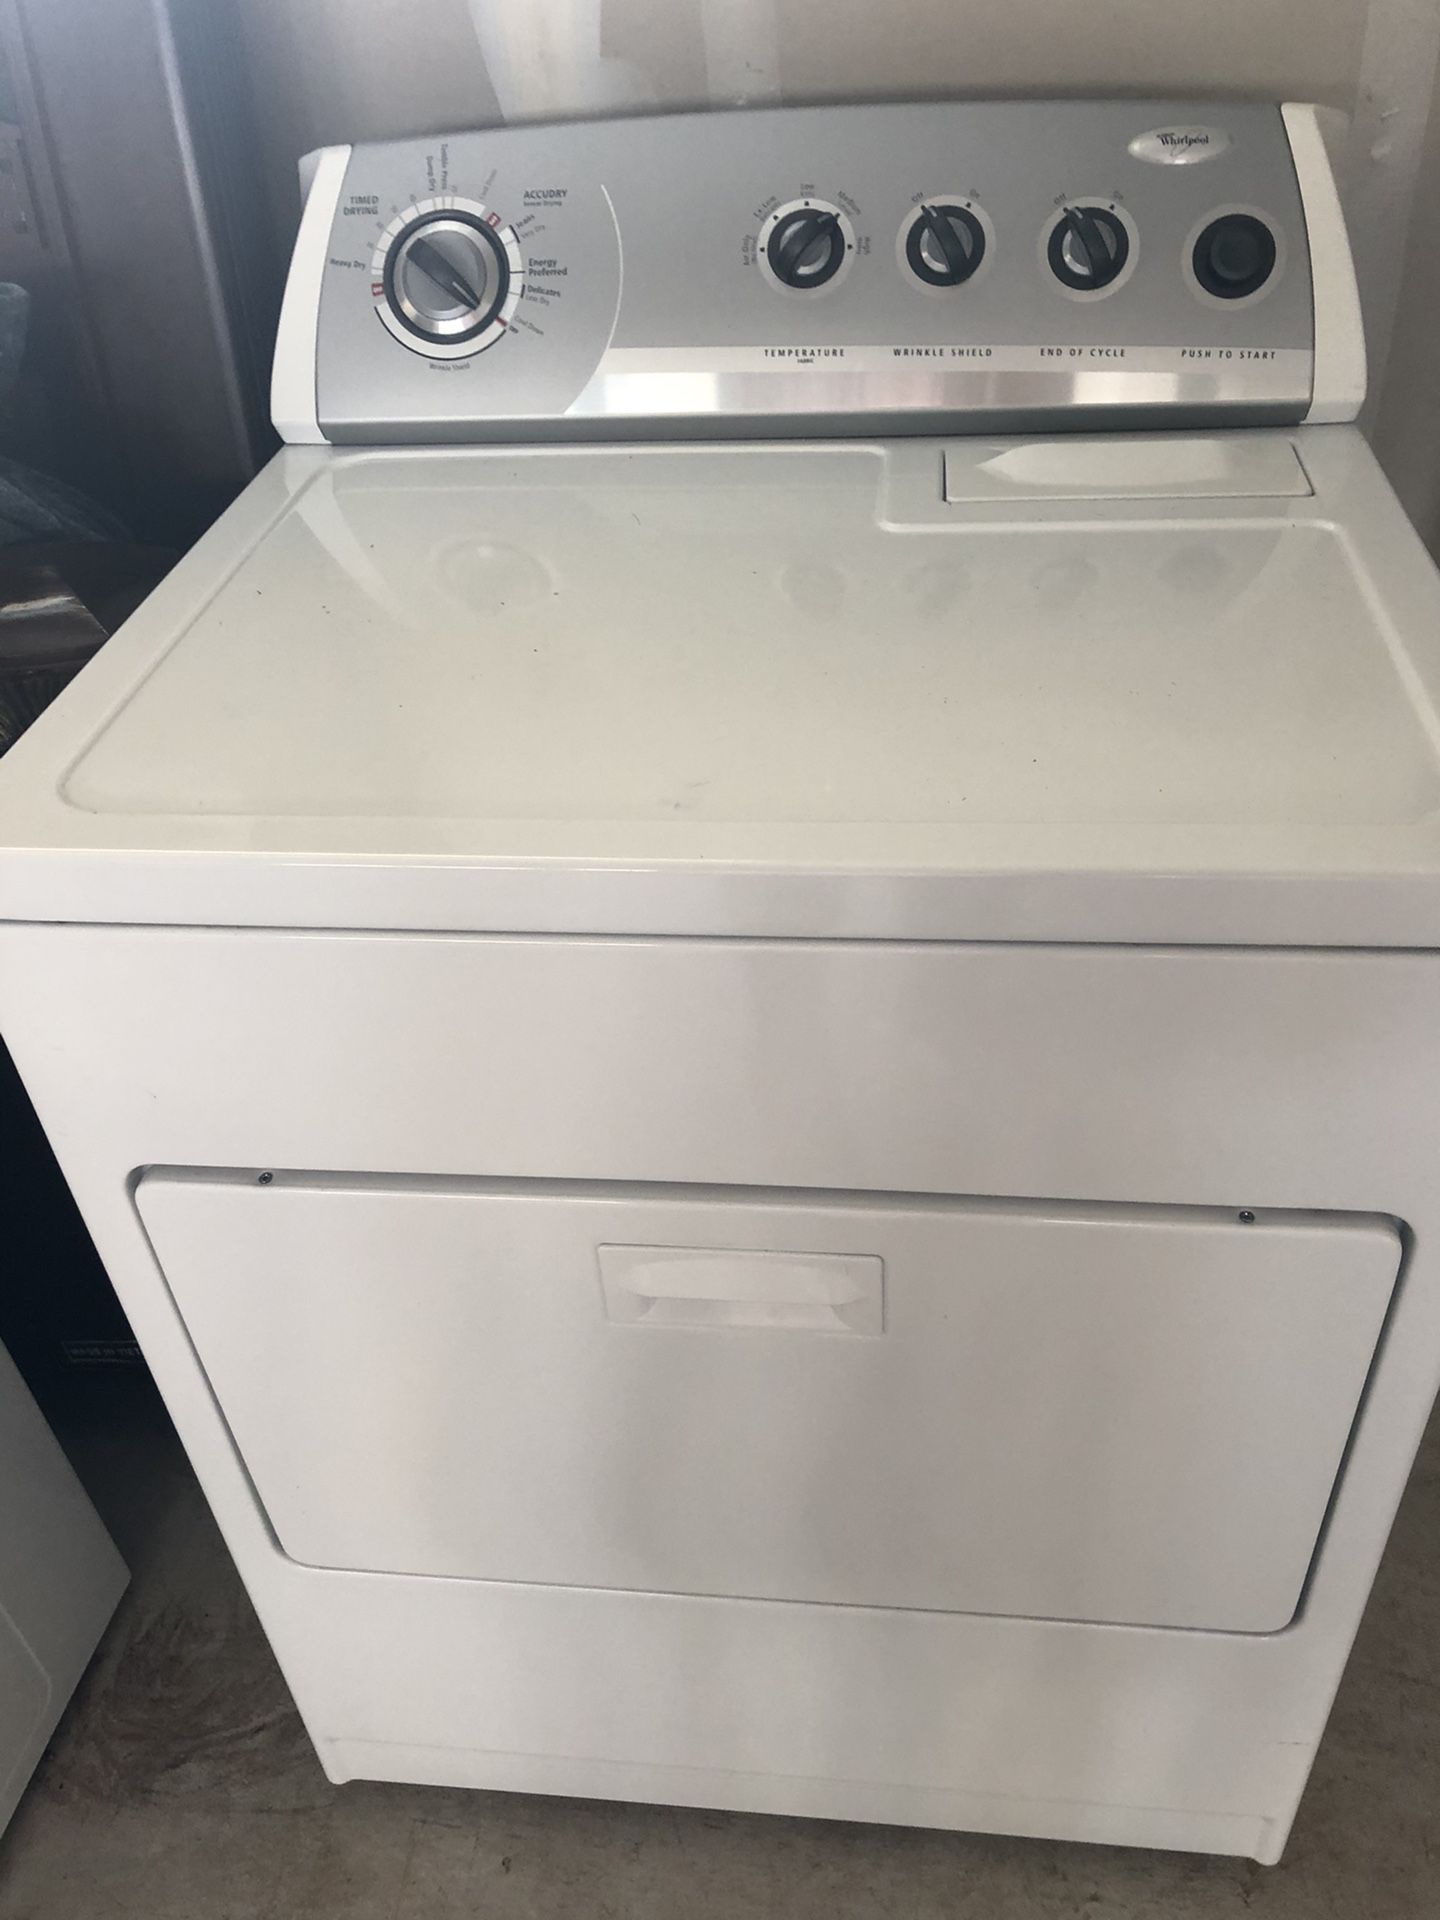 Whirlpool washer & dryer in good condition